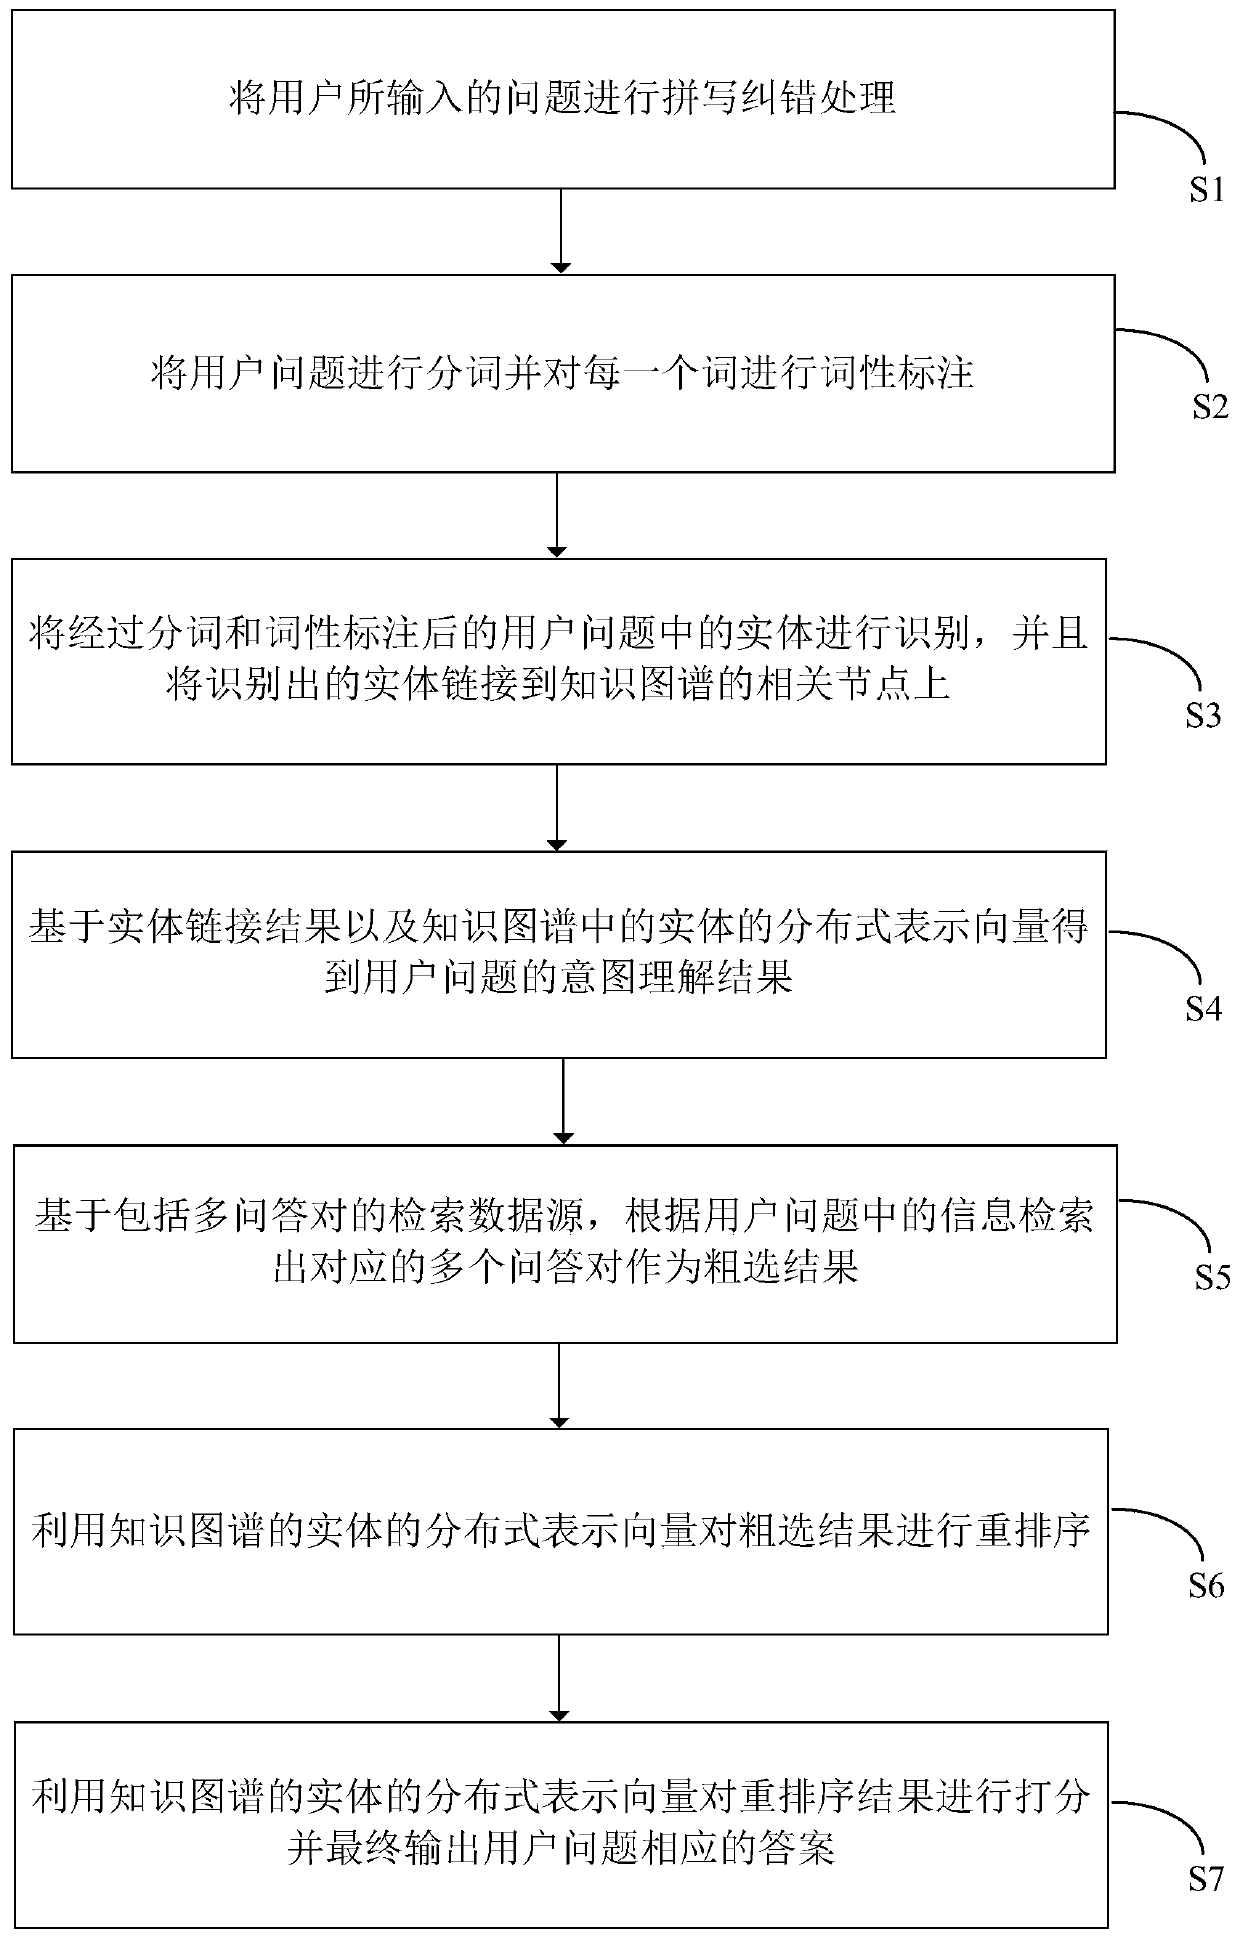 An information retrieval-based question and answer system and method for knowledge graph energization